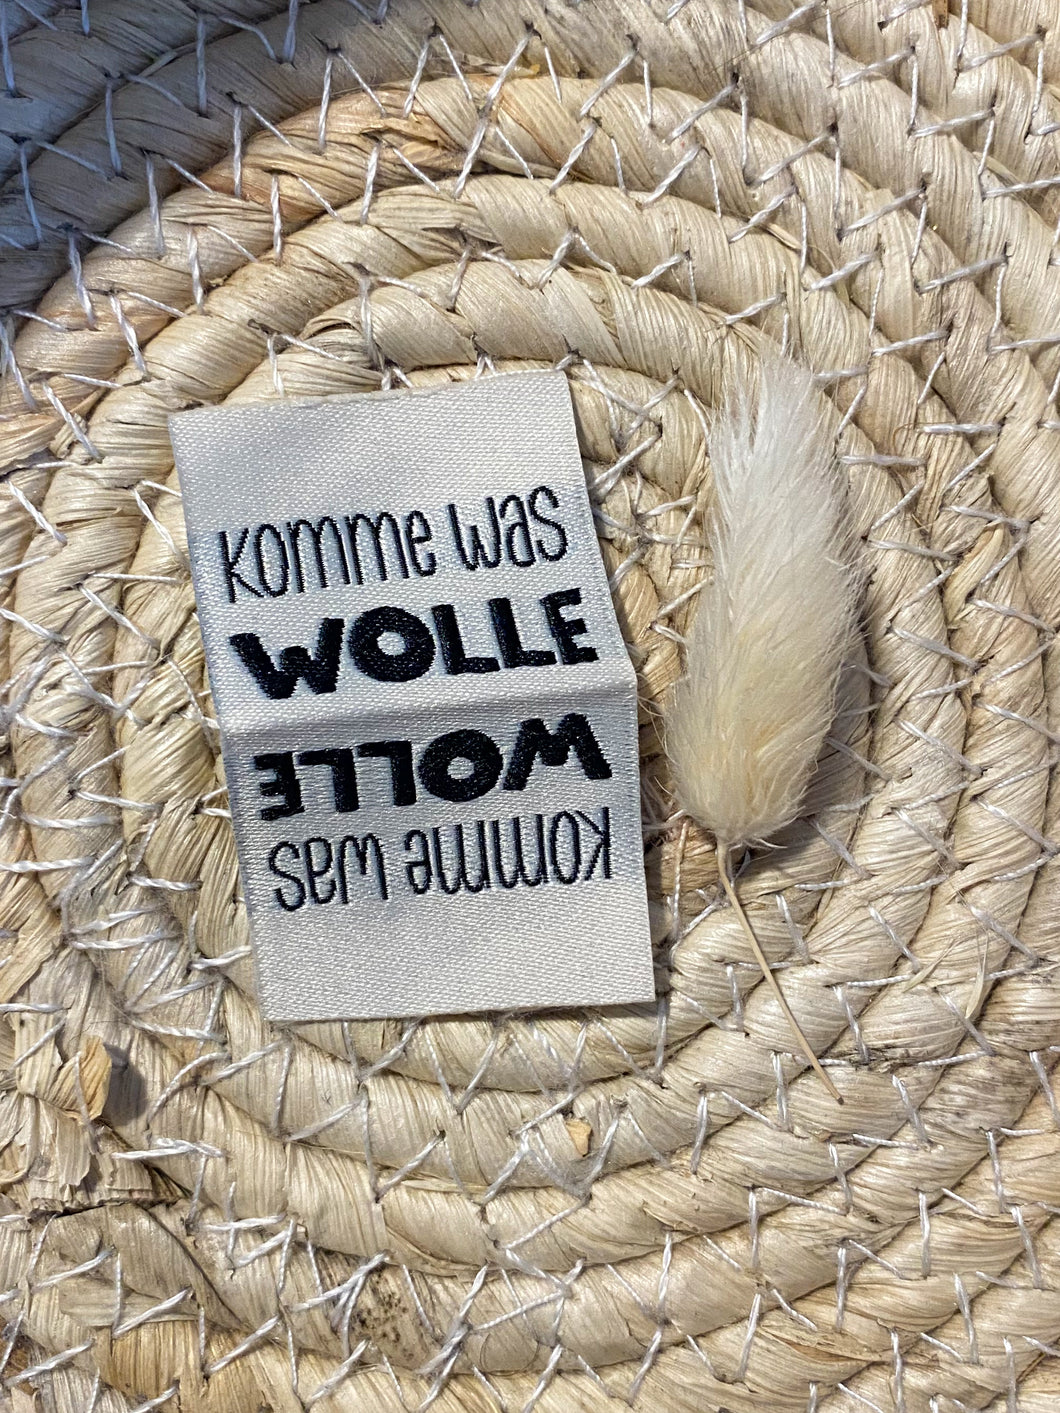 Komme was Wolle - Web Label